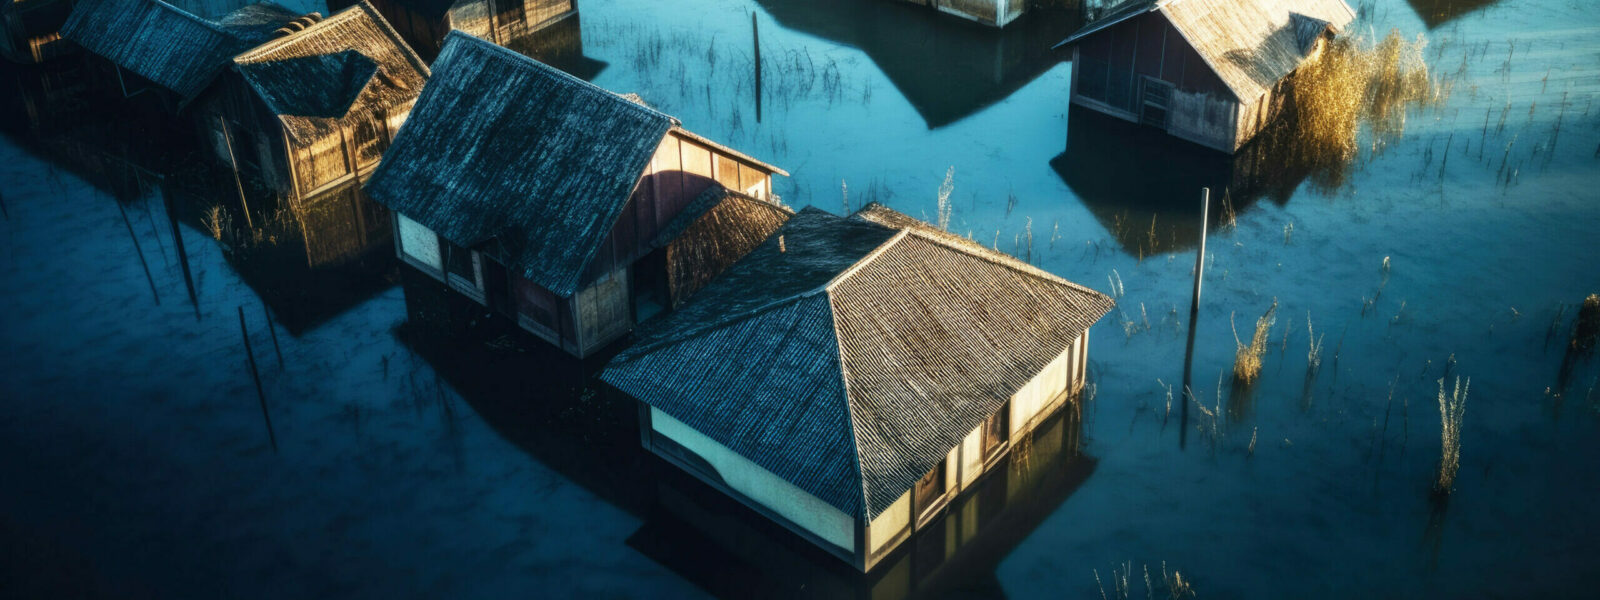 An aerial view of a flood-ravaged village shows submerged houses, reflecting the impact of a storm and global warming. Generative AI